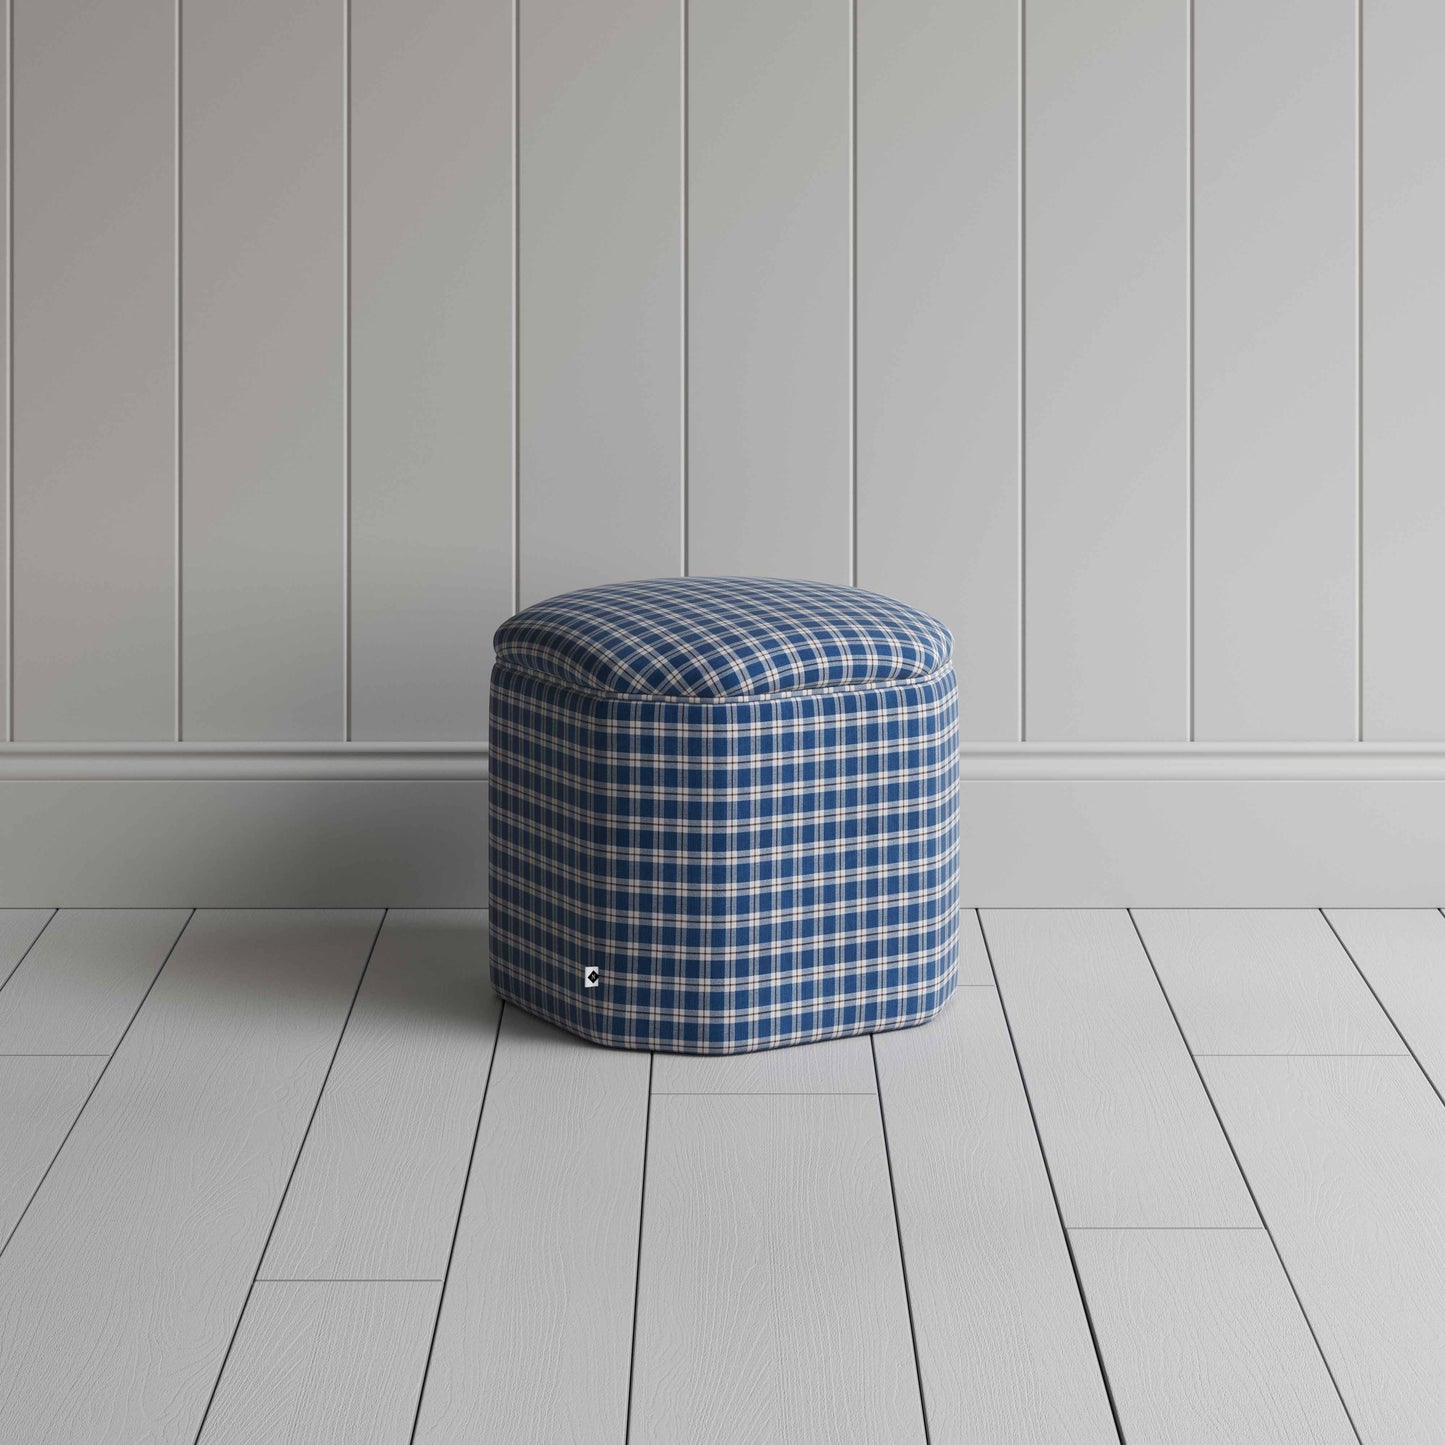 Thither Hexagonal Ottoman in Well Plaid Cotton, Blue Brown